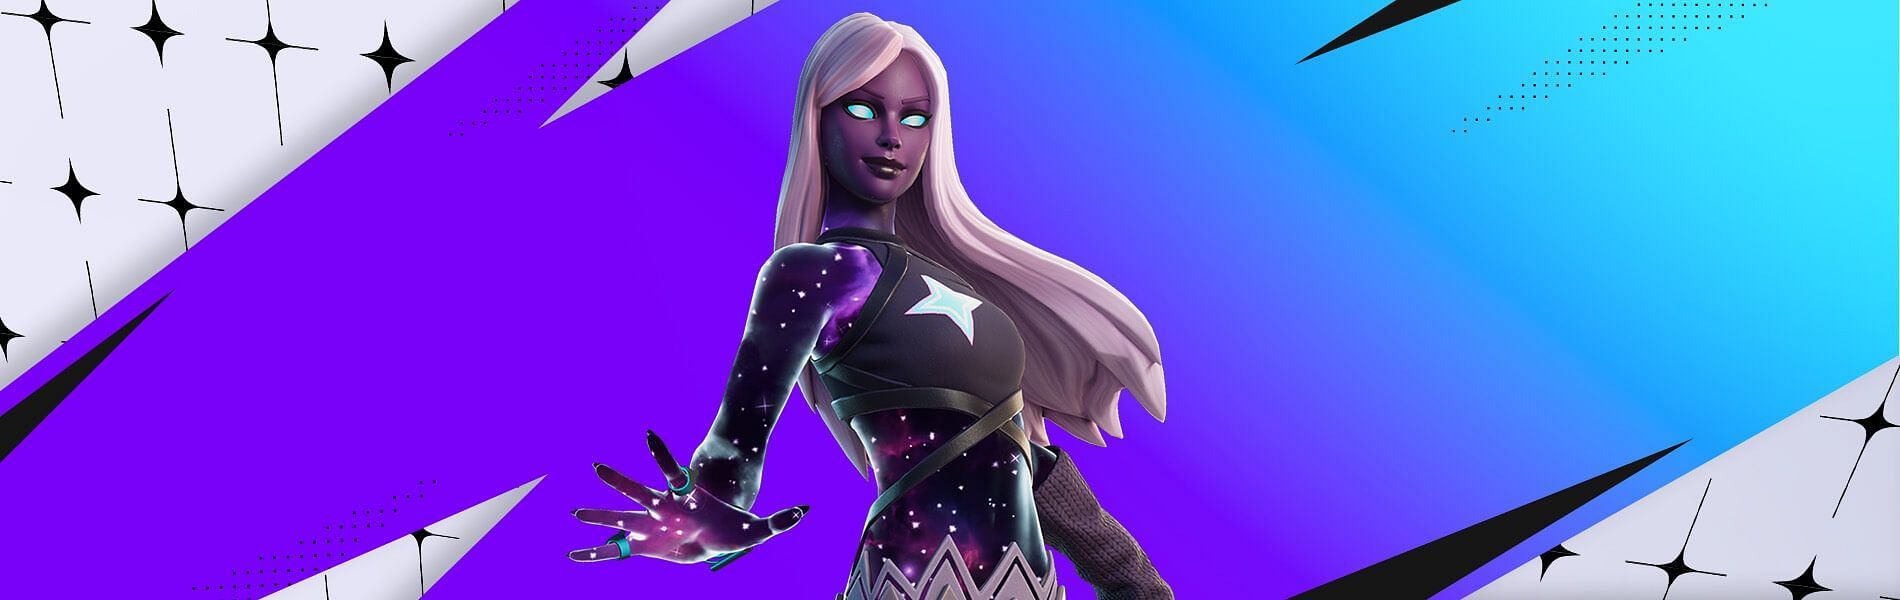 This skin was available for free (Image via Epic Games)